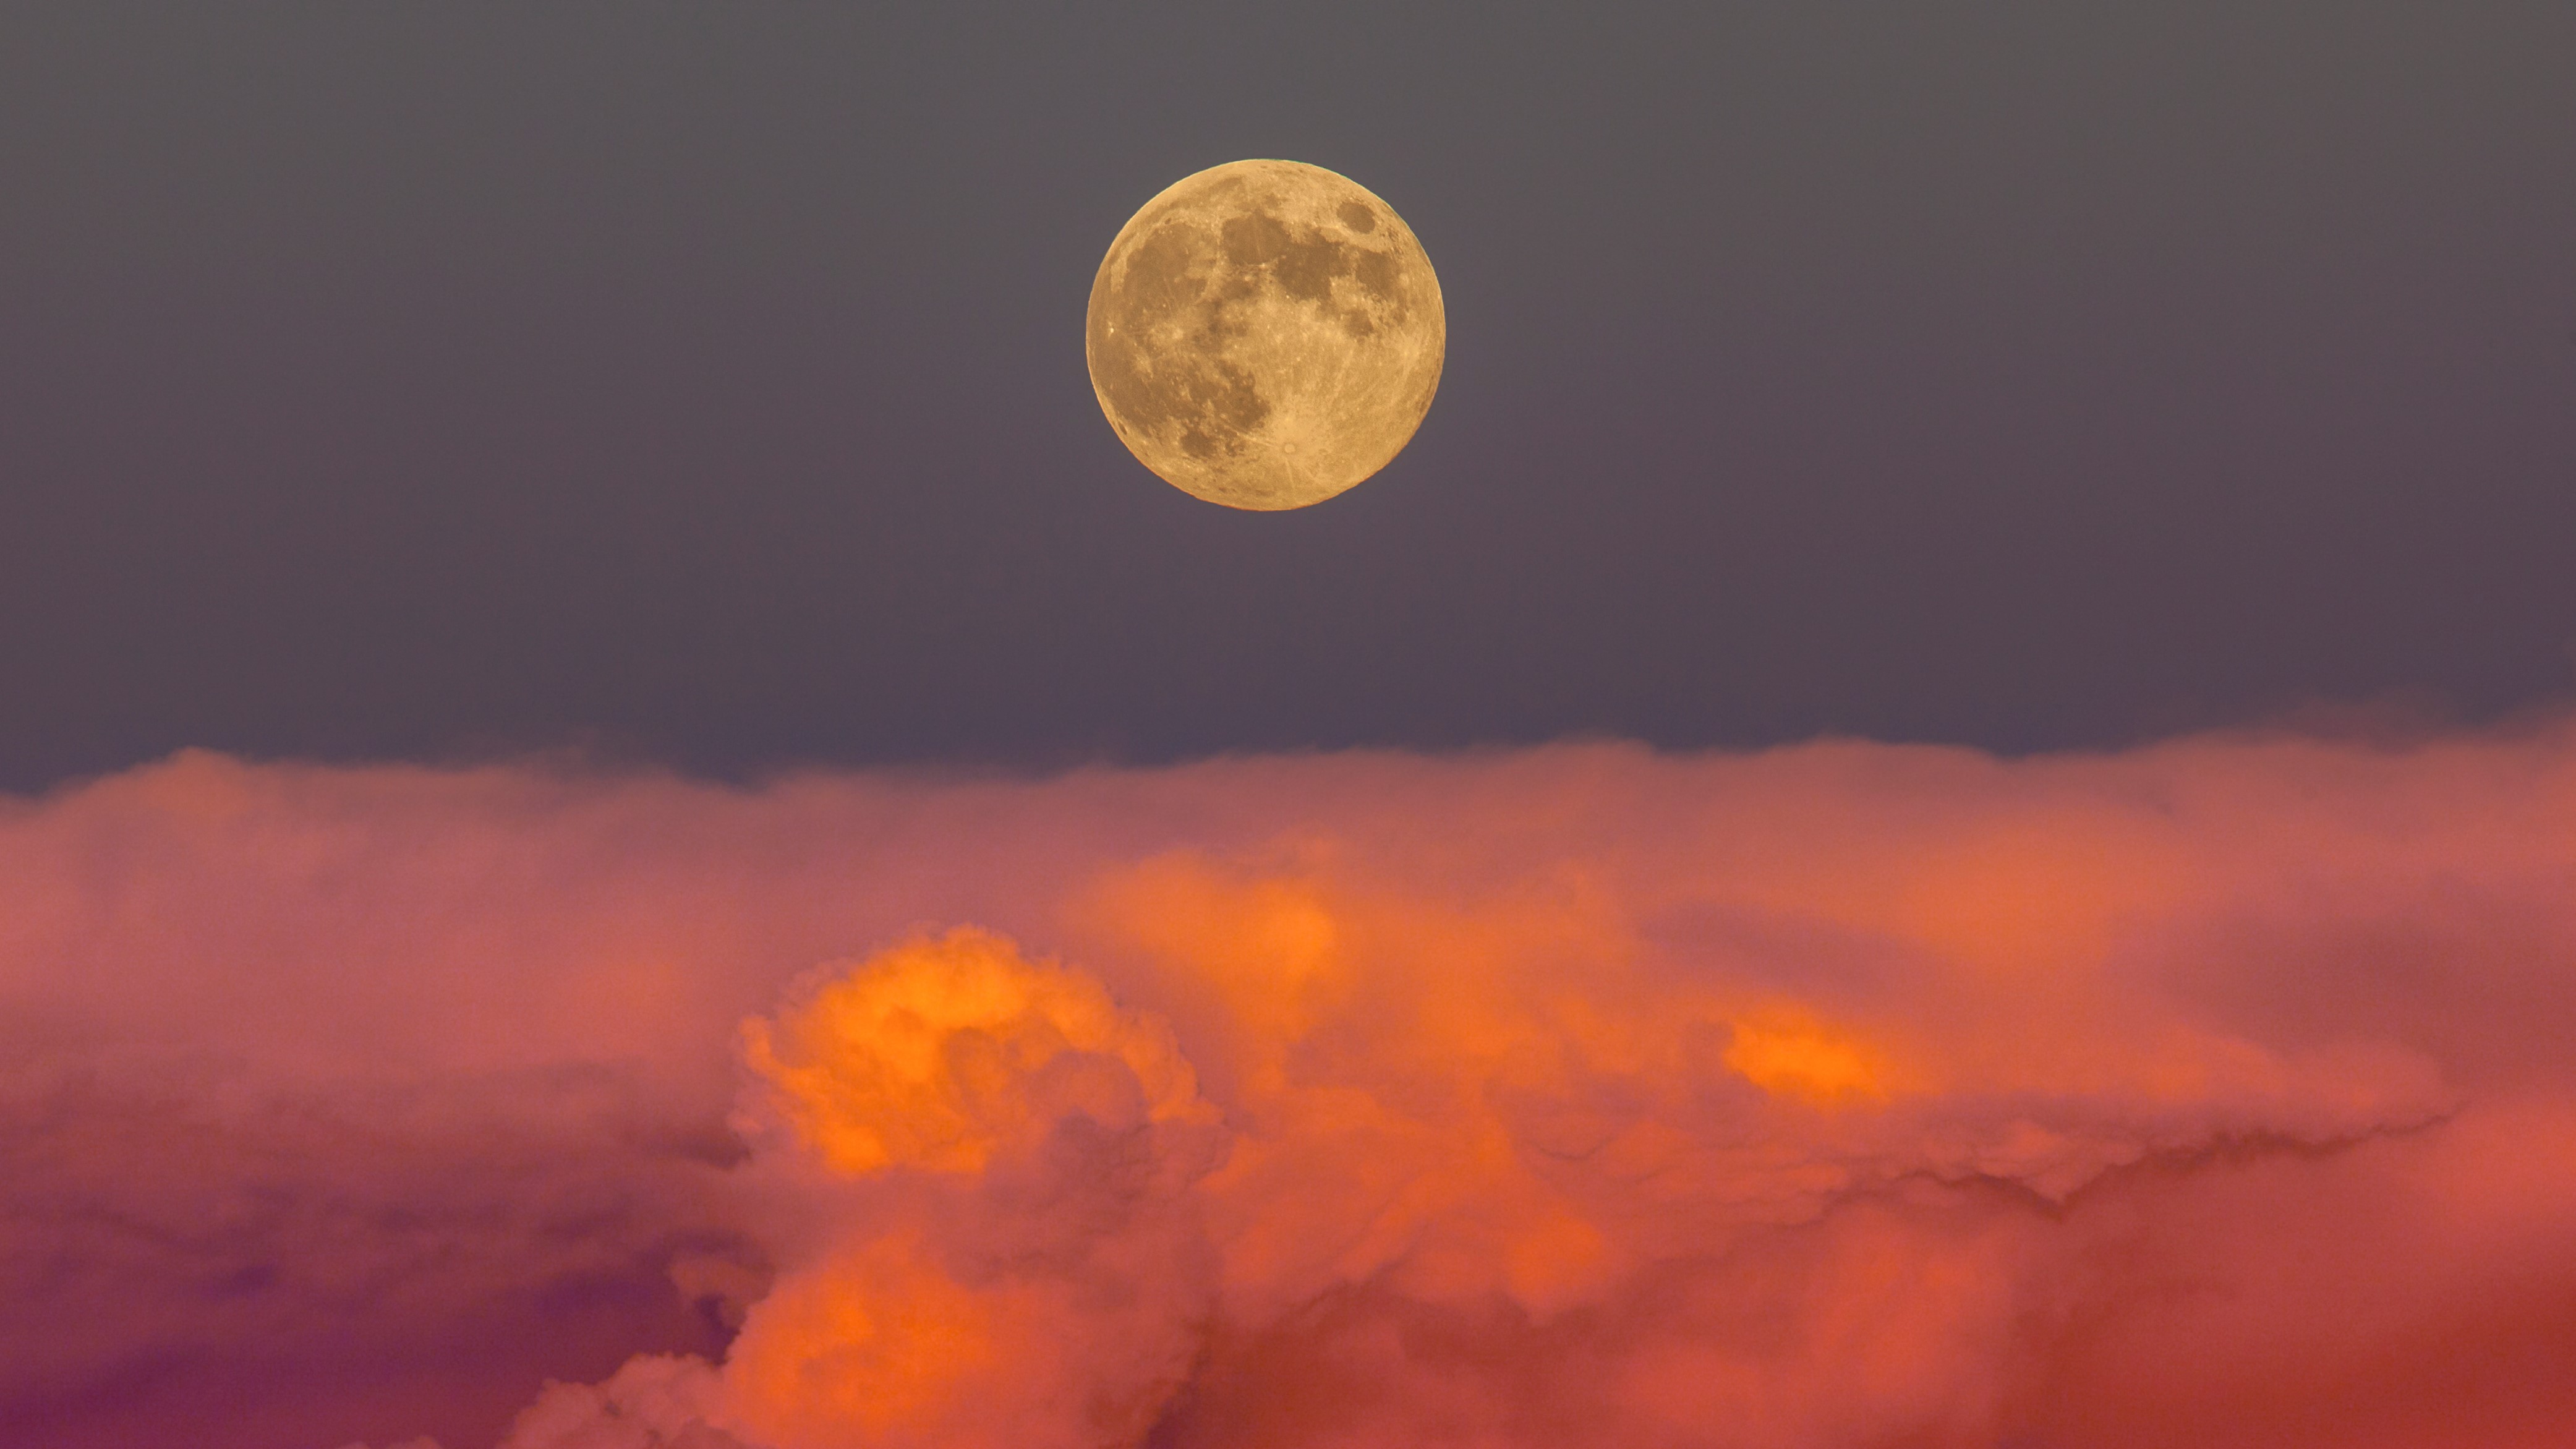 The full pink moon is coming Saturday. Here is how to watch.